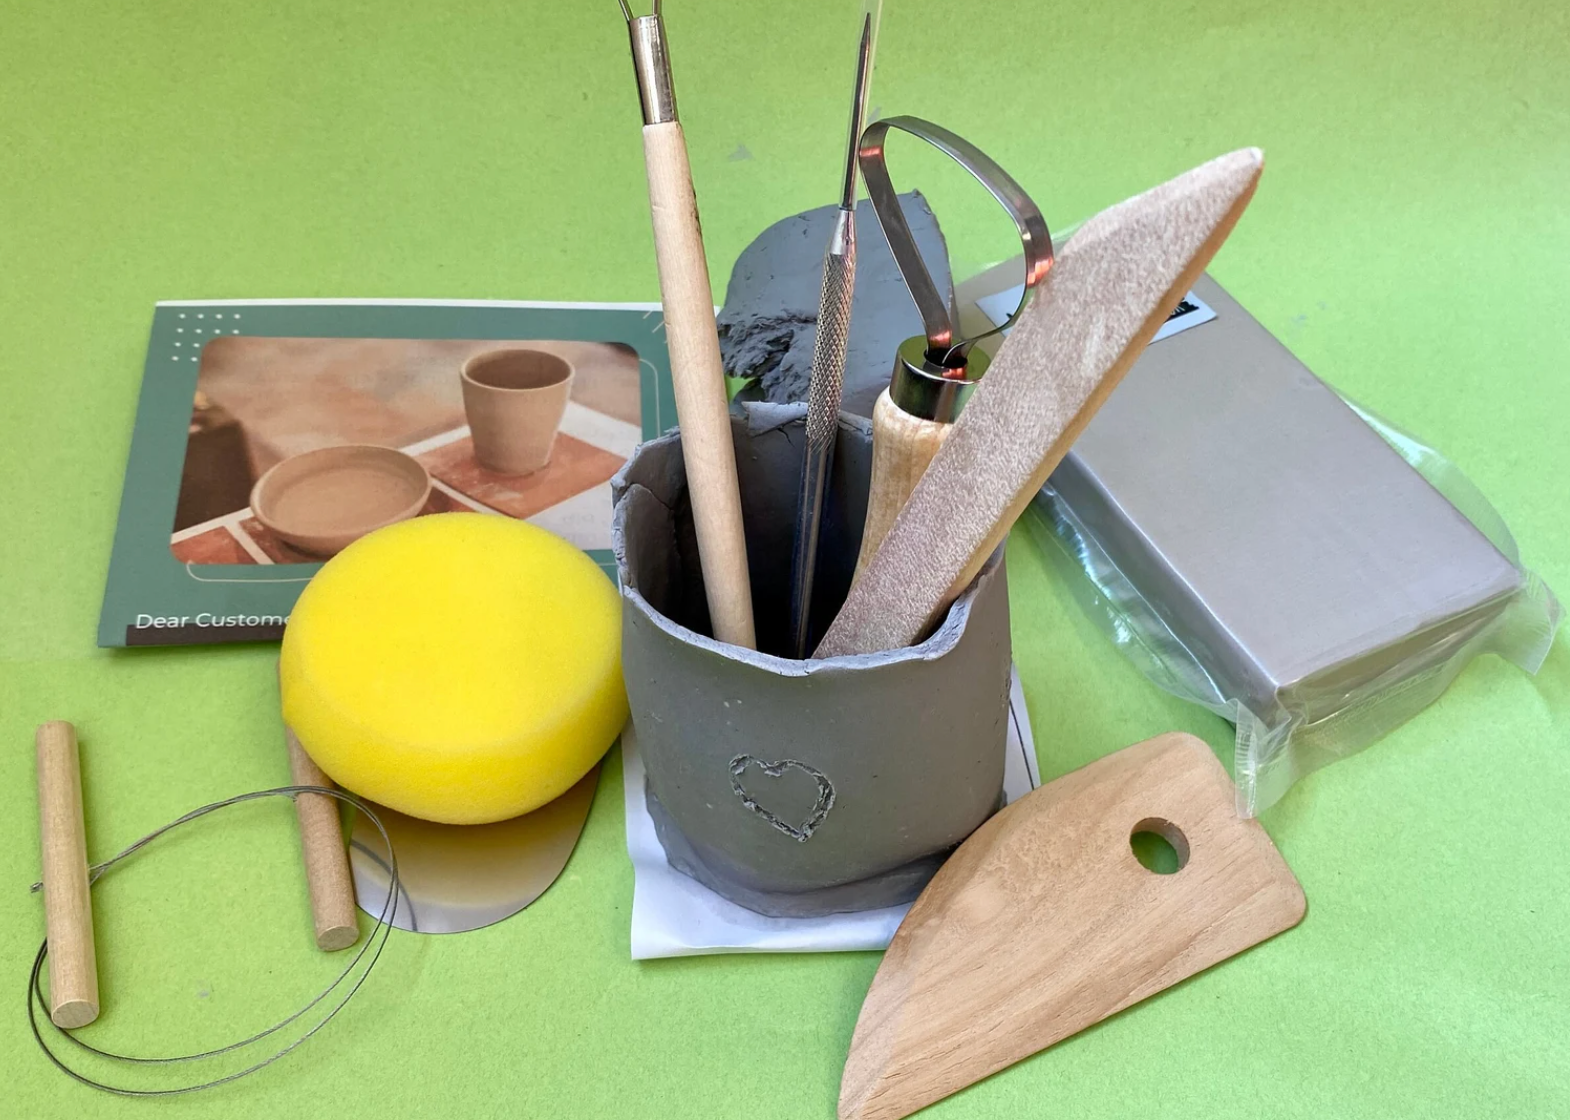 Create Your Own Clay Pottery Kit Home Pottery Craft Kit 1-2 People Air  Drying Clay Sculpting Kit With Tools and Plants -  Israel